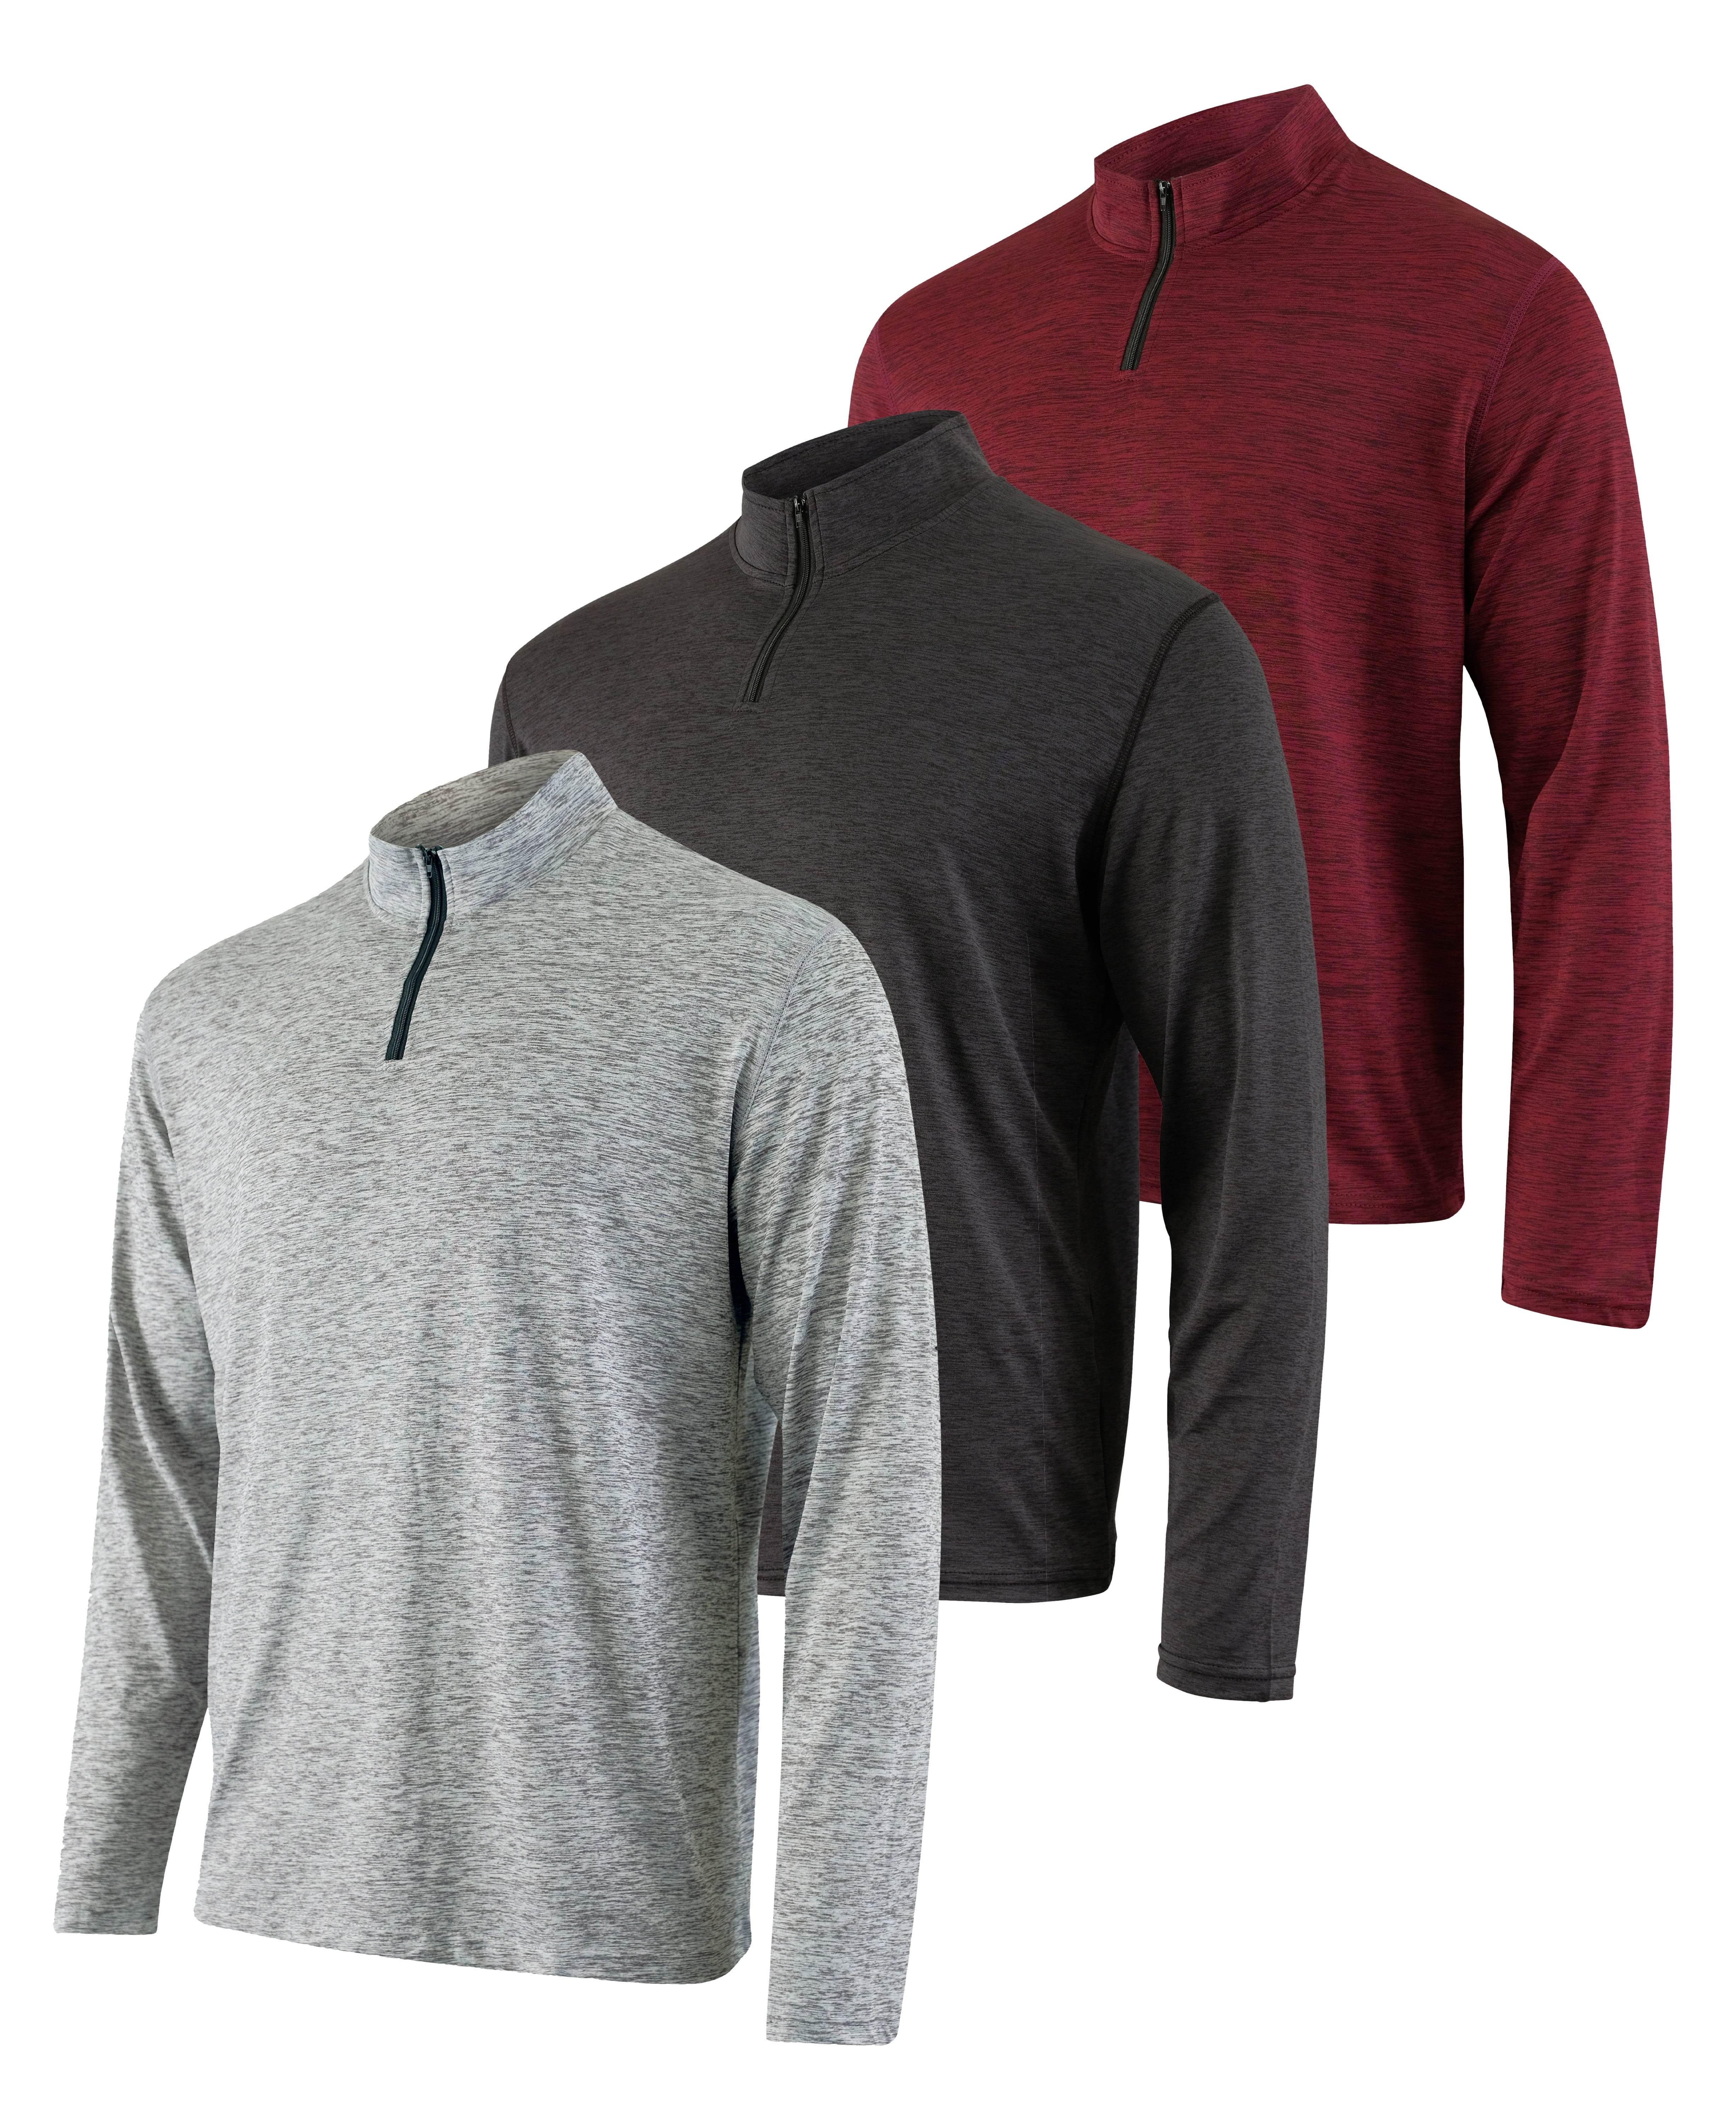  Real Essentials 3 Pack: Men's Cotton Performance Long Sleeve  Crew Neck Pocket T-Shirt Athletic Top (Available in Big & Tall) : Clothing